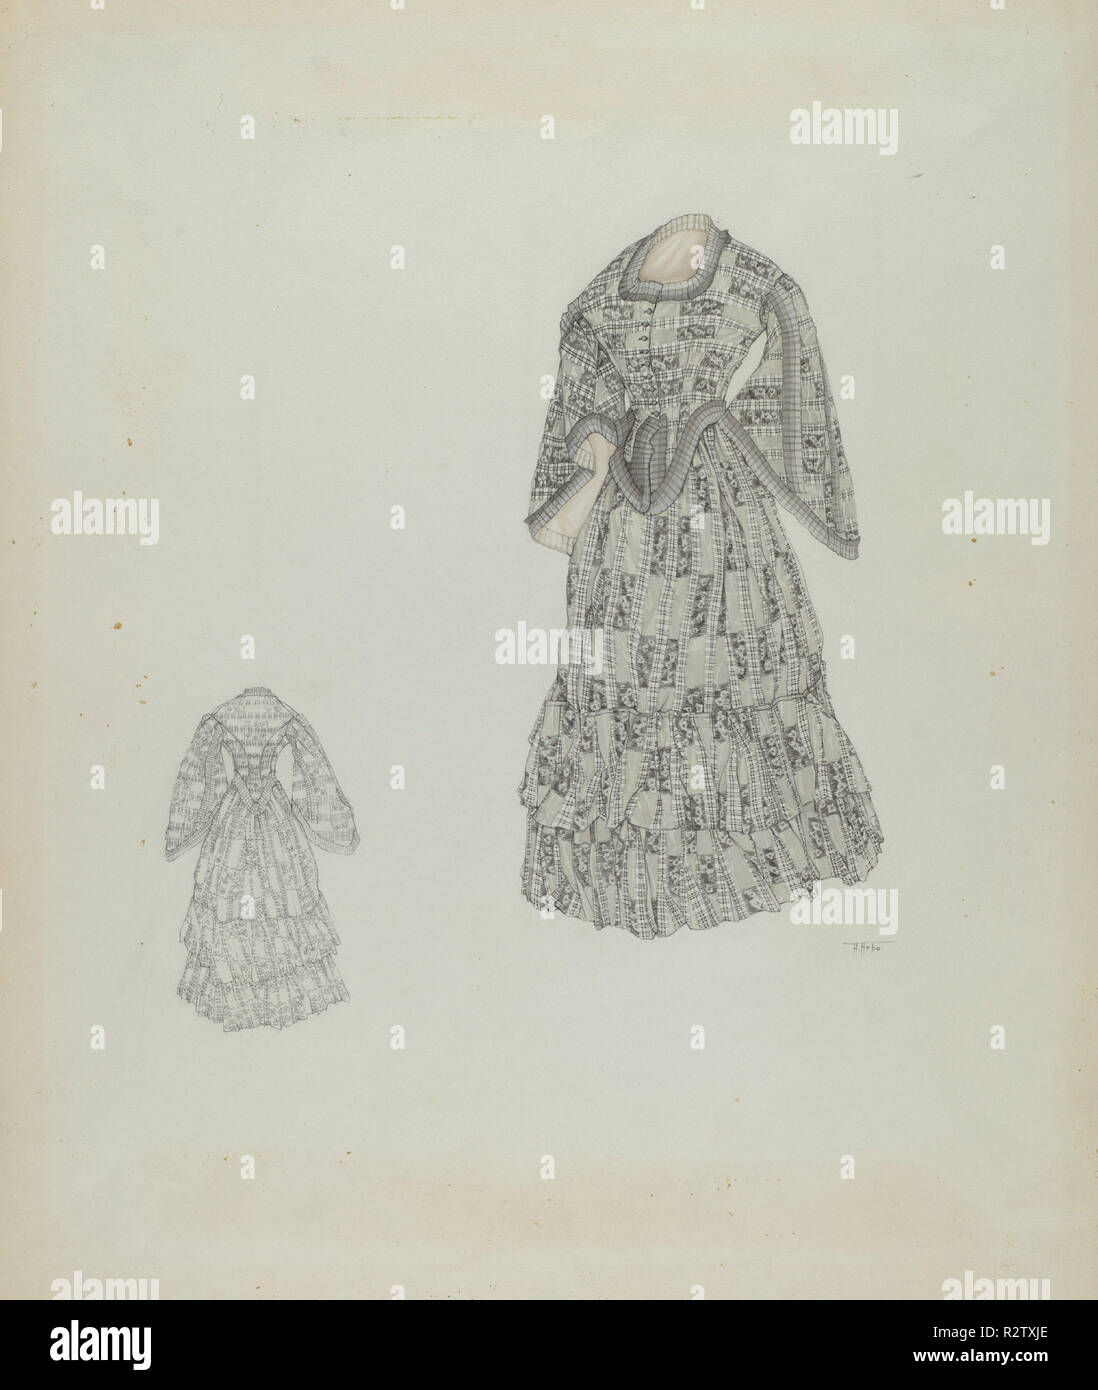 Dress. Dated: c. 1937. Dimensions: overall: 43.2 x 36.5 cm (17 x 14 3/8 in.). Medium: watercolor and graphite on paper. Museum: National Gallery of Art, Washington DC. Author: Arelia Arbo. Stock Photo